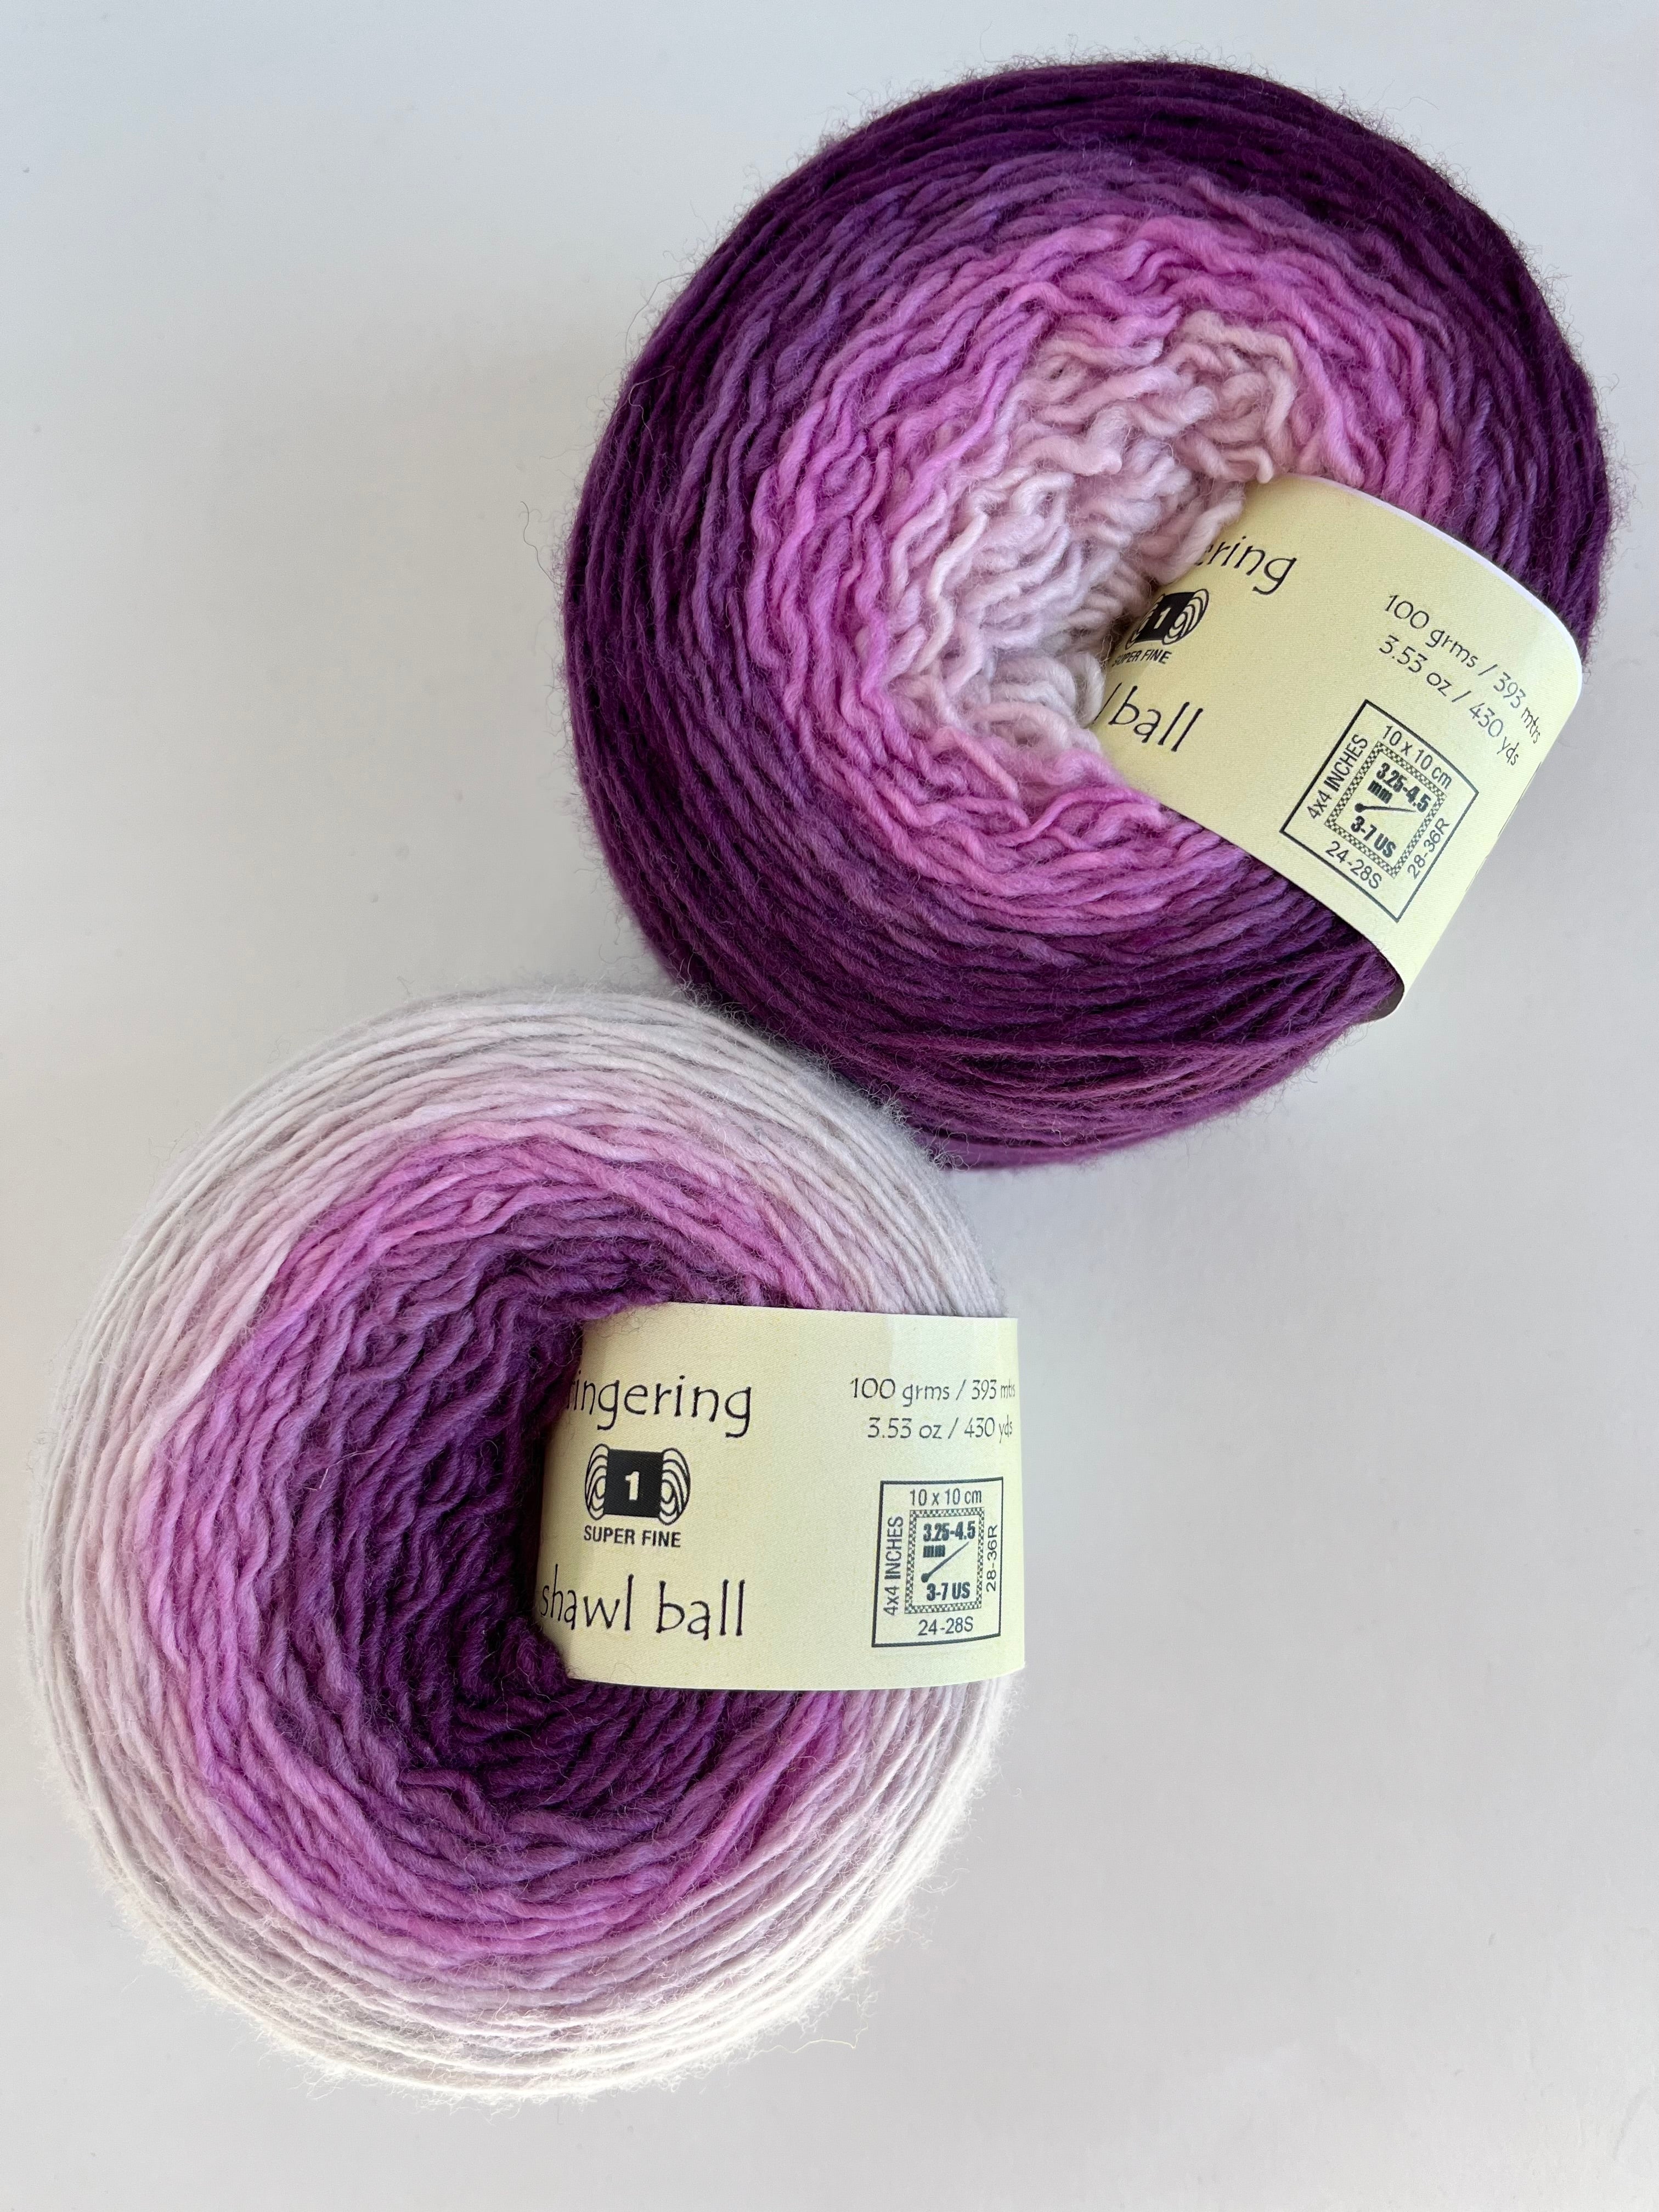 Orchid - Ombre Shawl ball from Freia